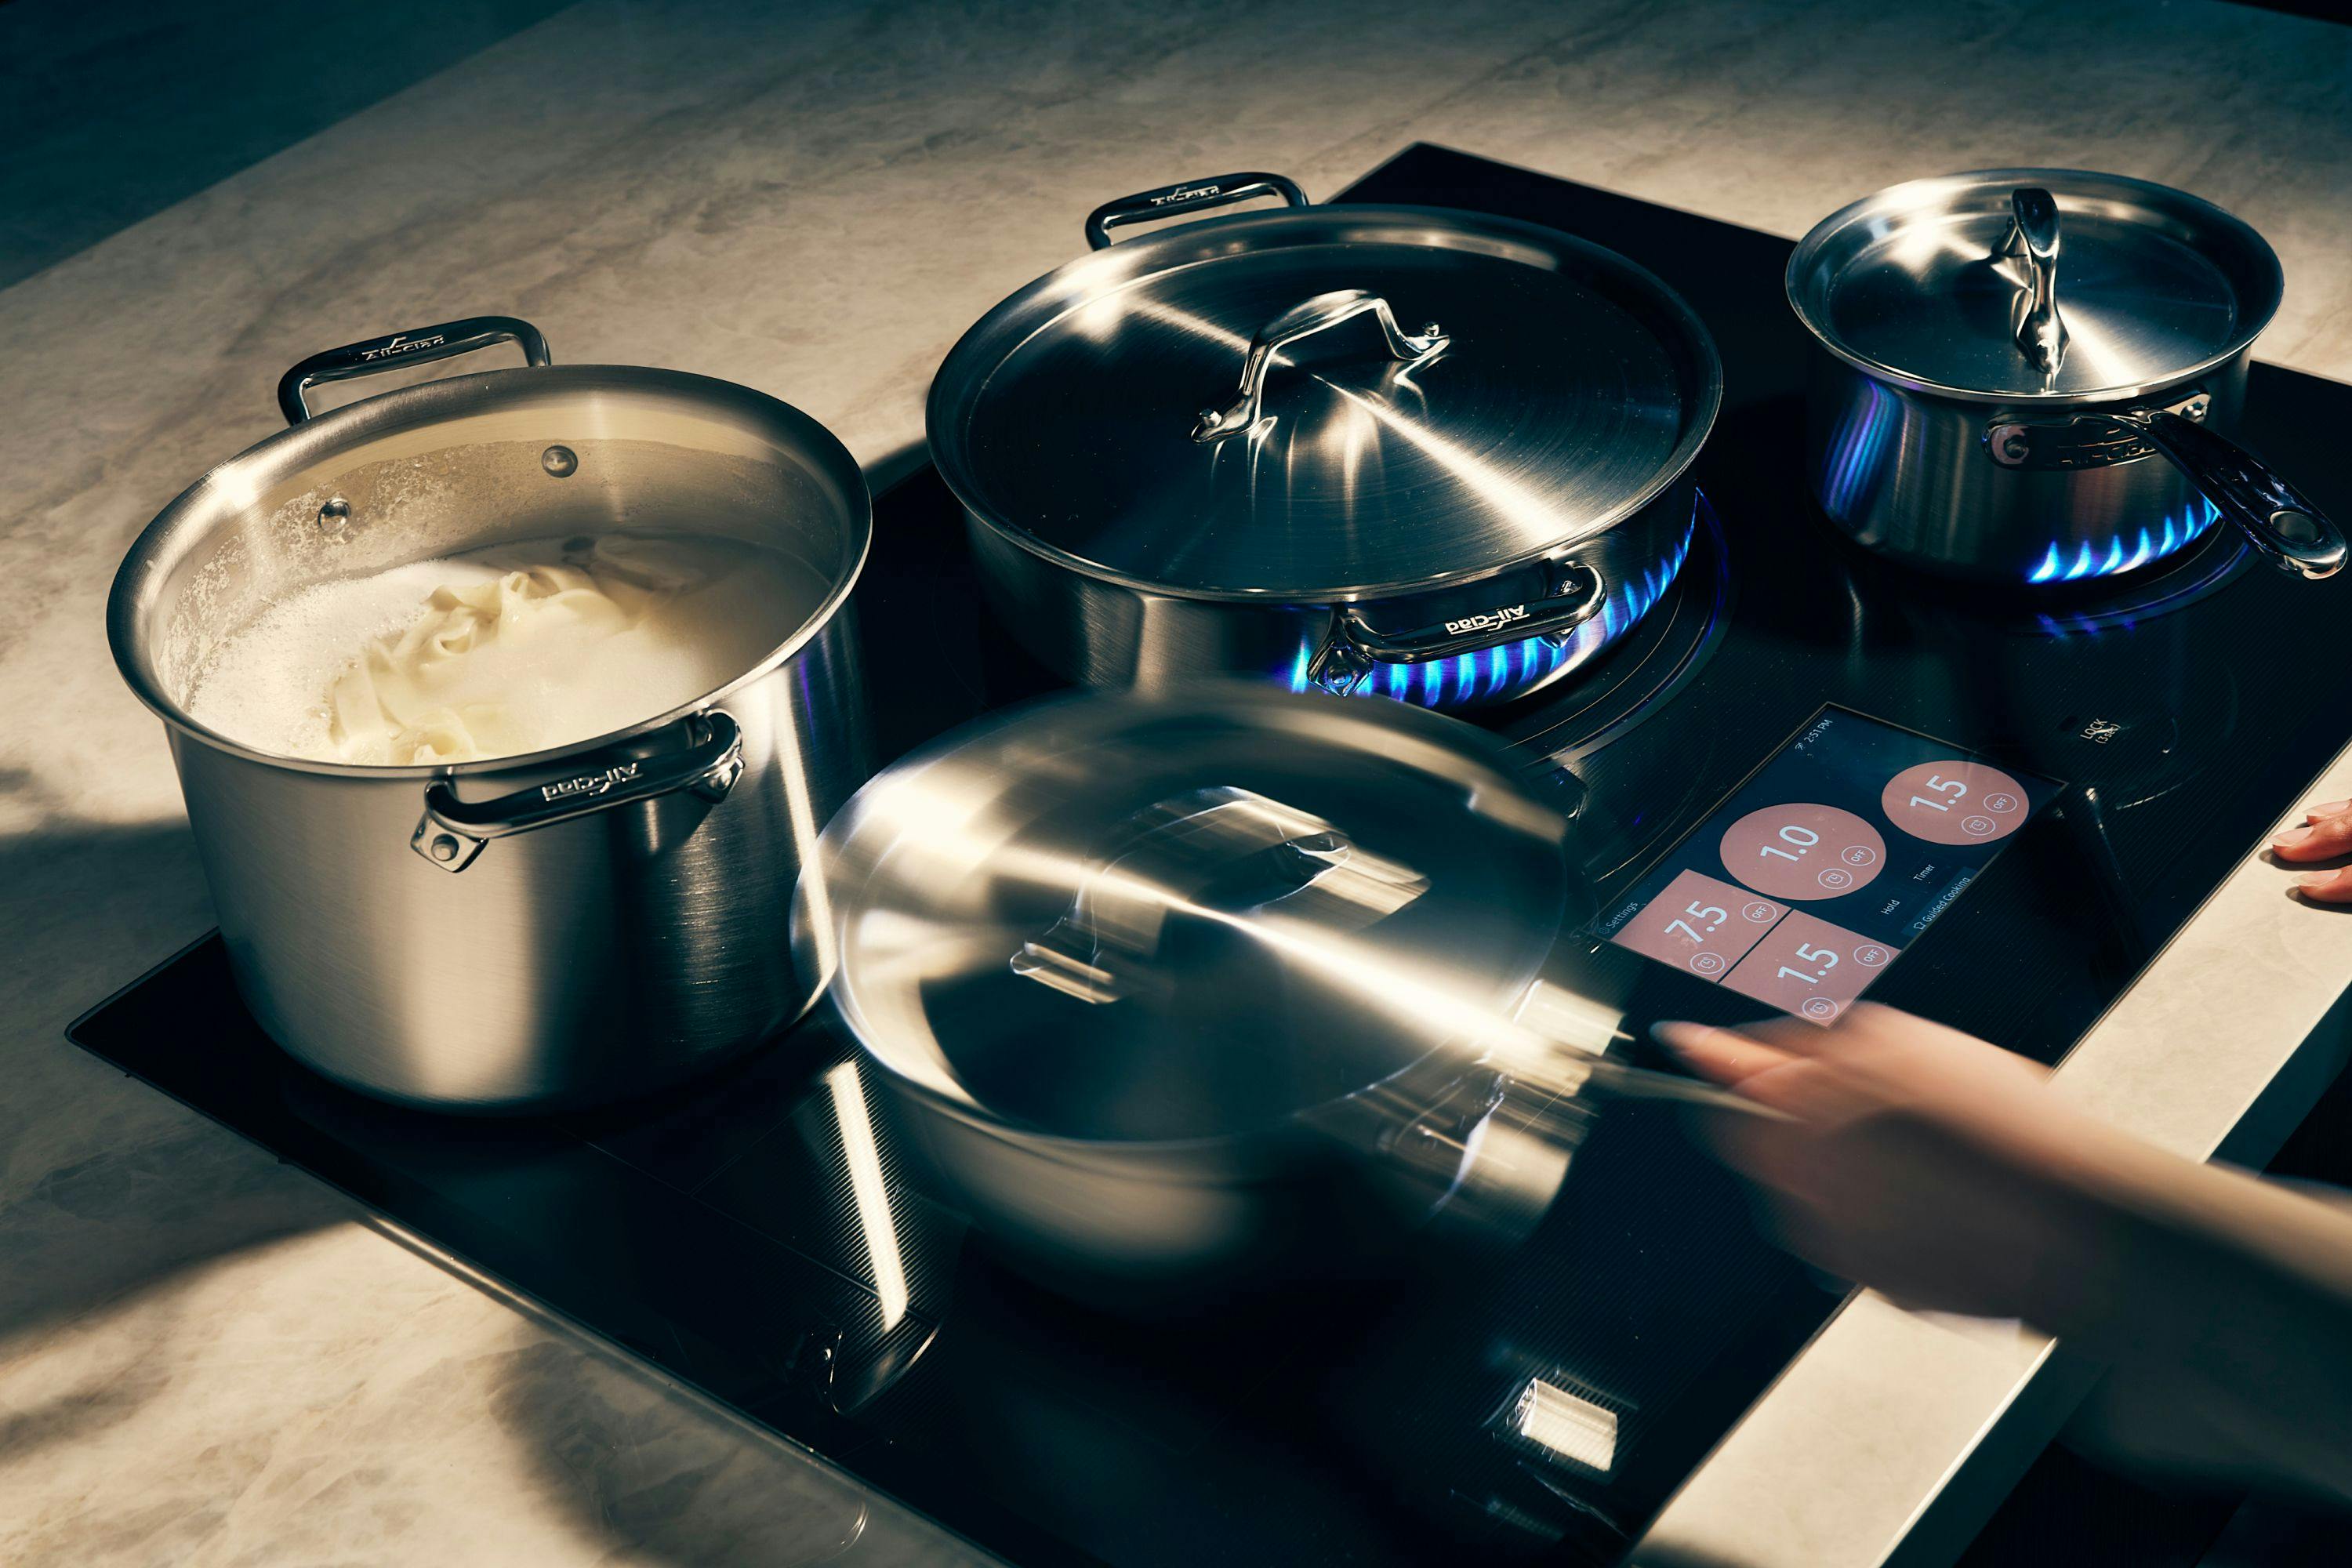 Assortment of pots on burners on a stovetop with digital display